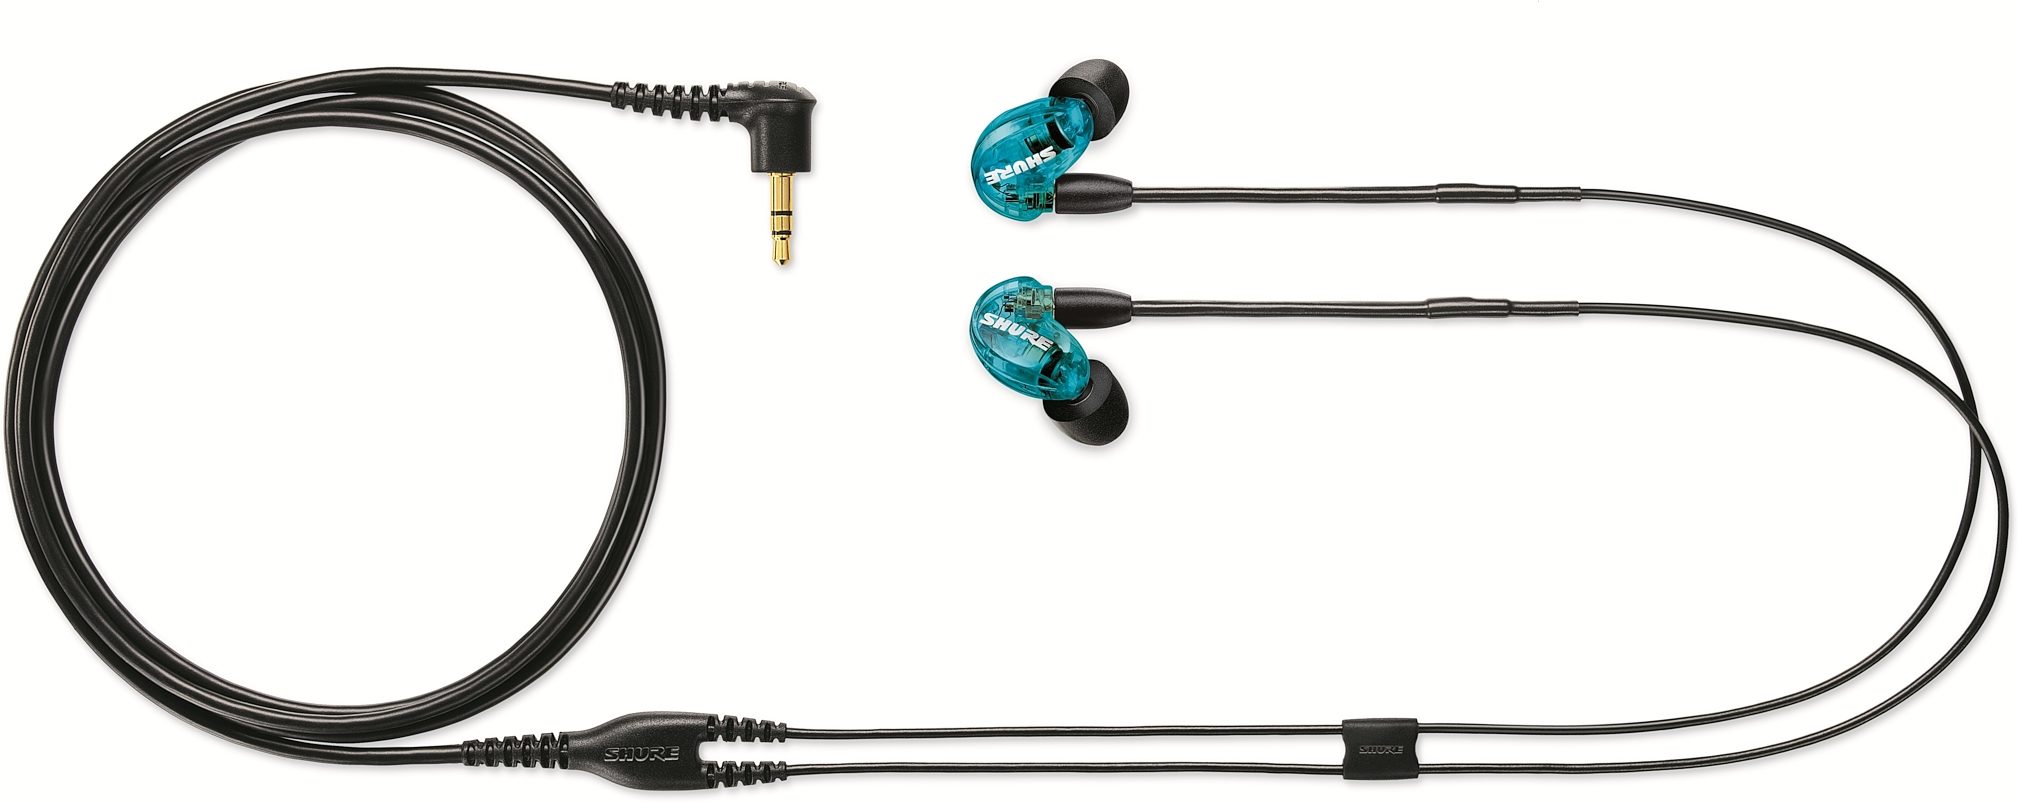 Shure SE215 Special Edition Sound Isolating Earphones